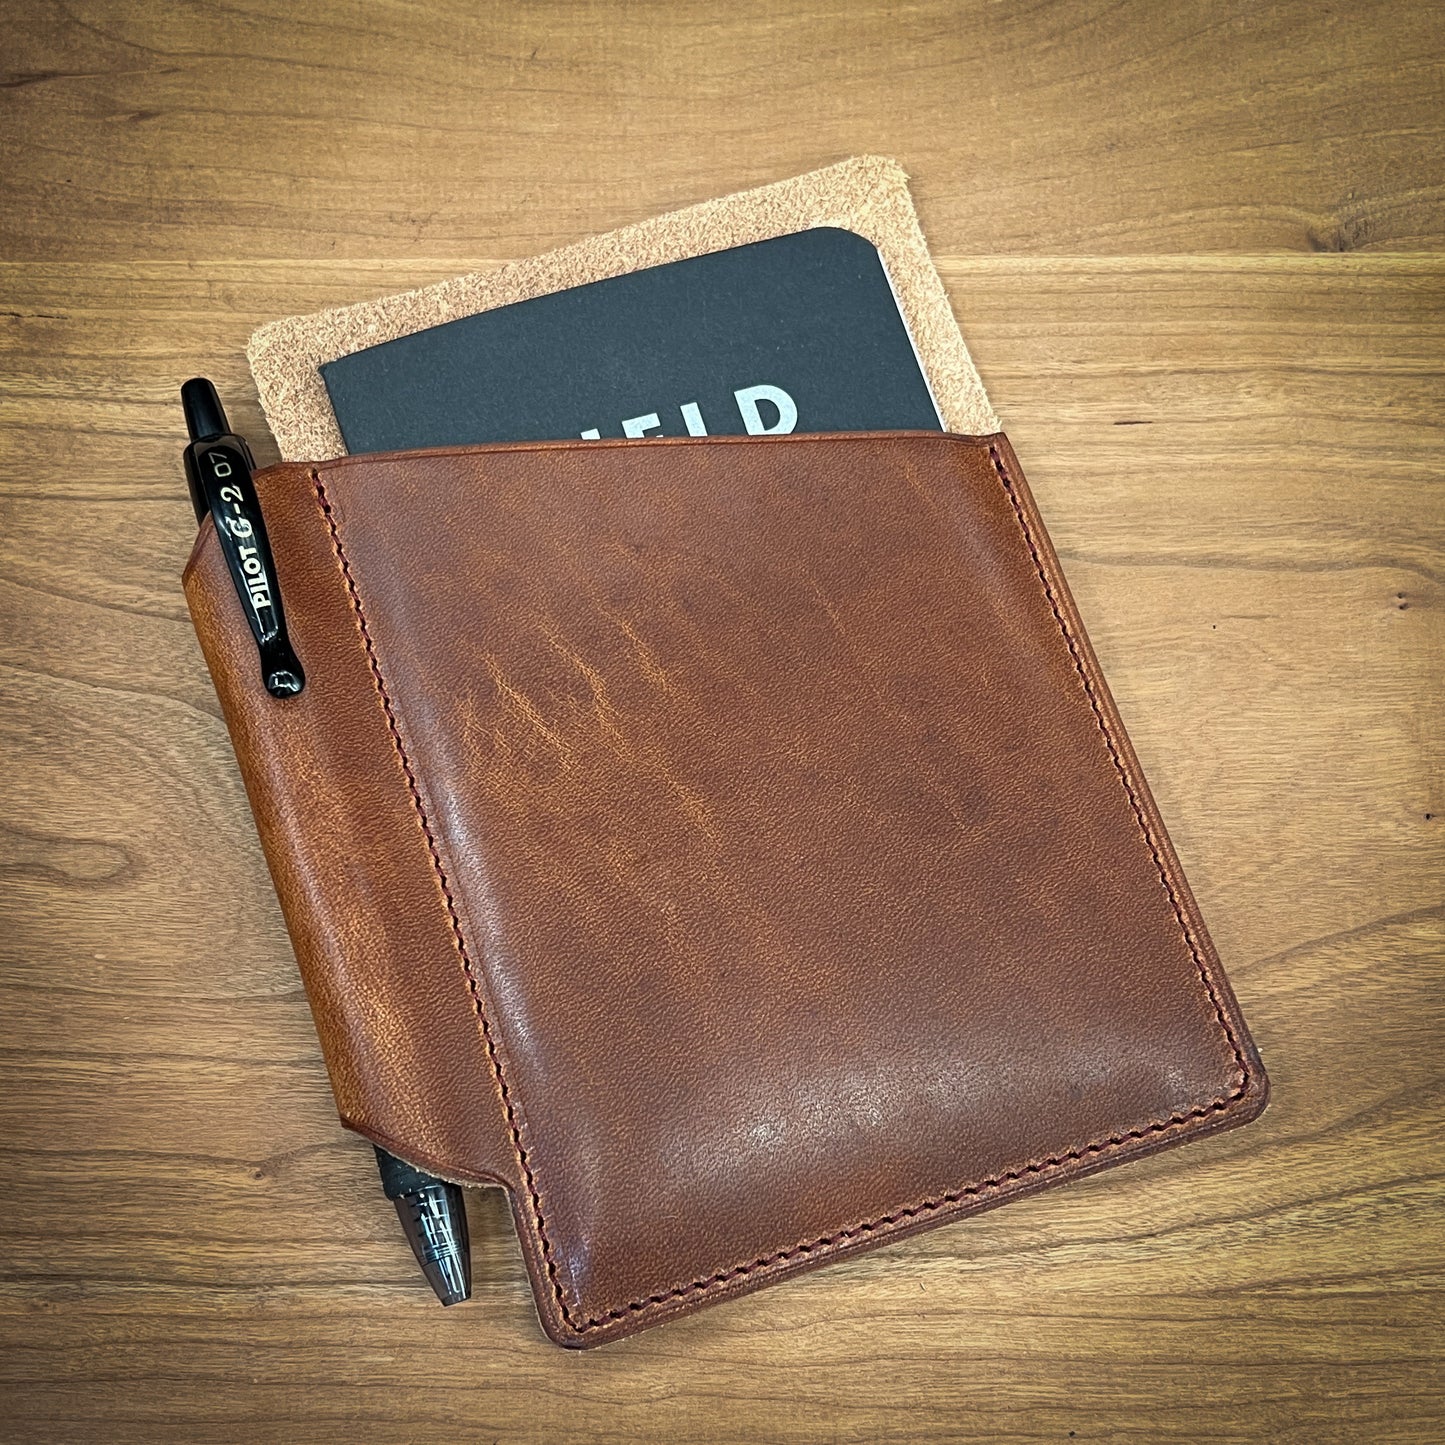 Field Notes Slip Cover in English Tan Dublin Horween Leather | Ready to Ship